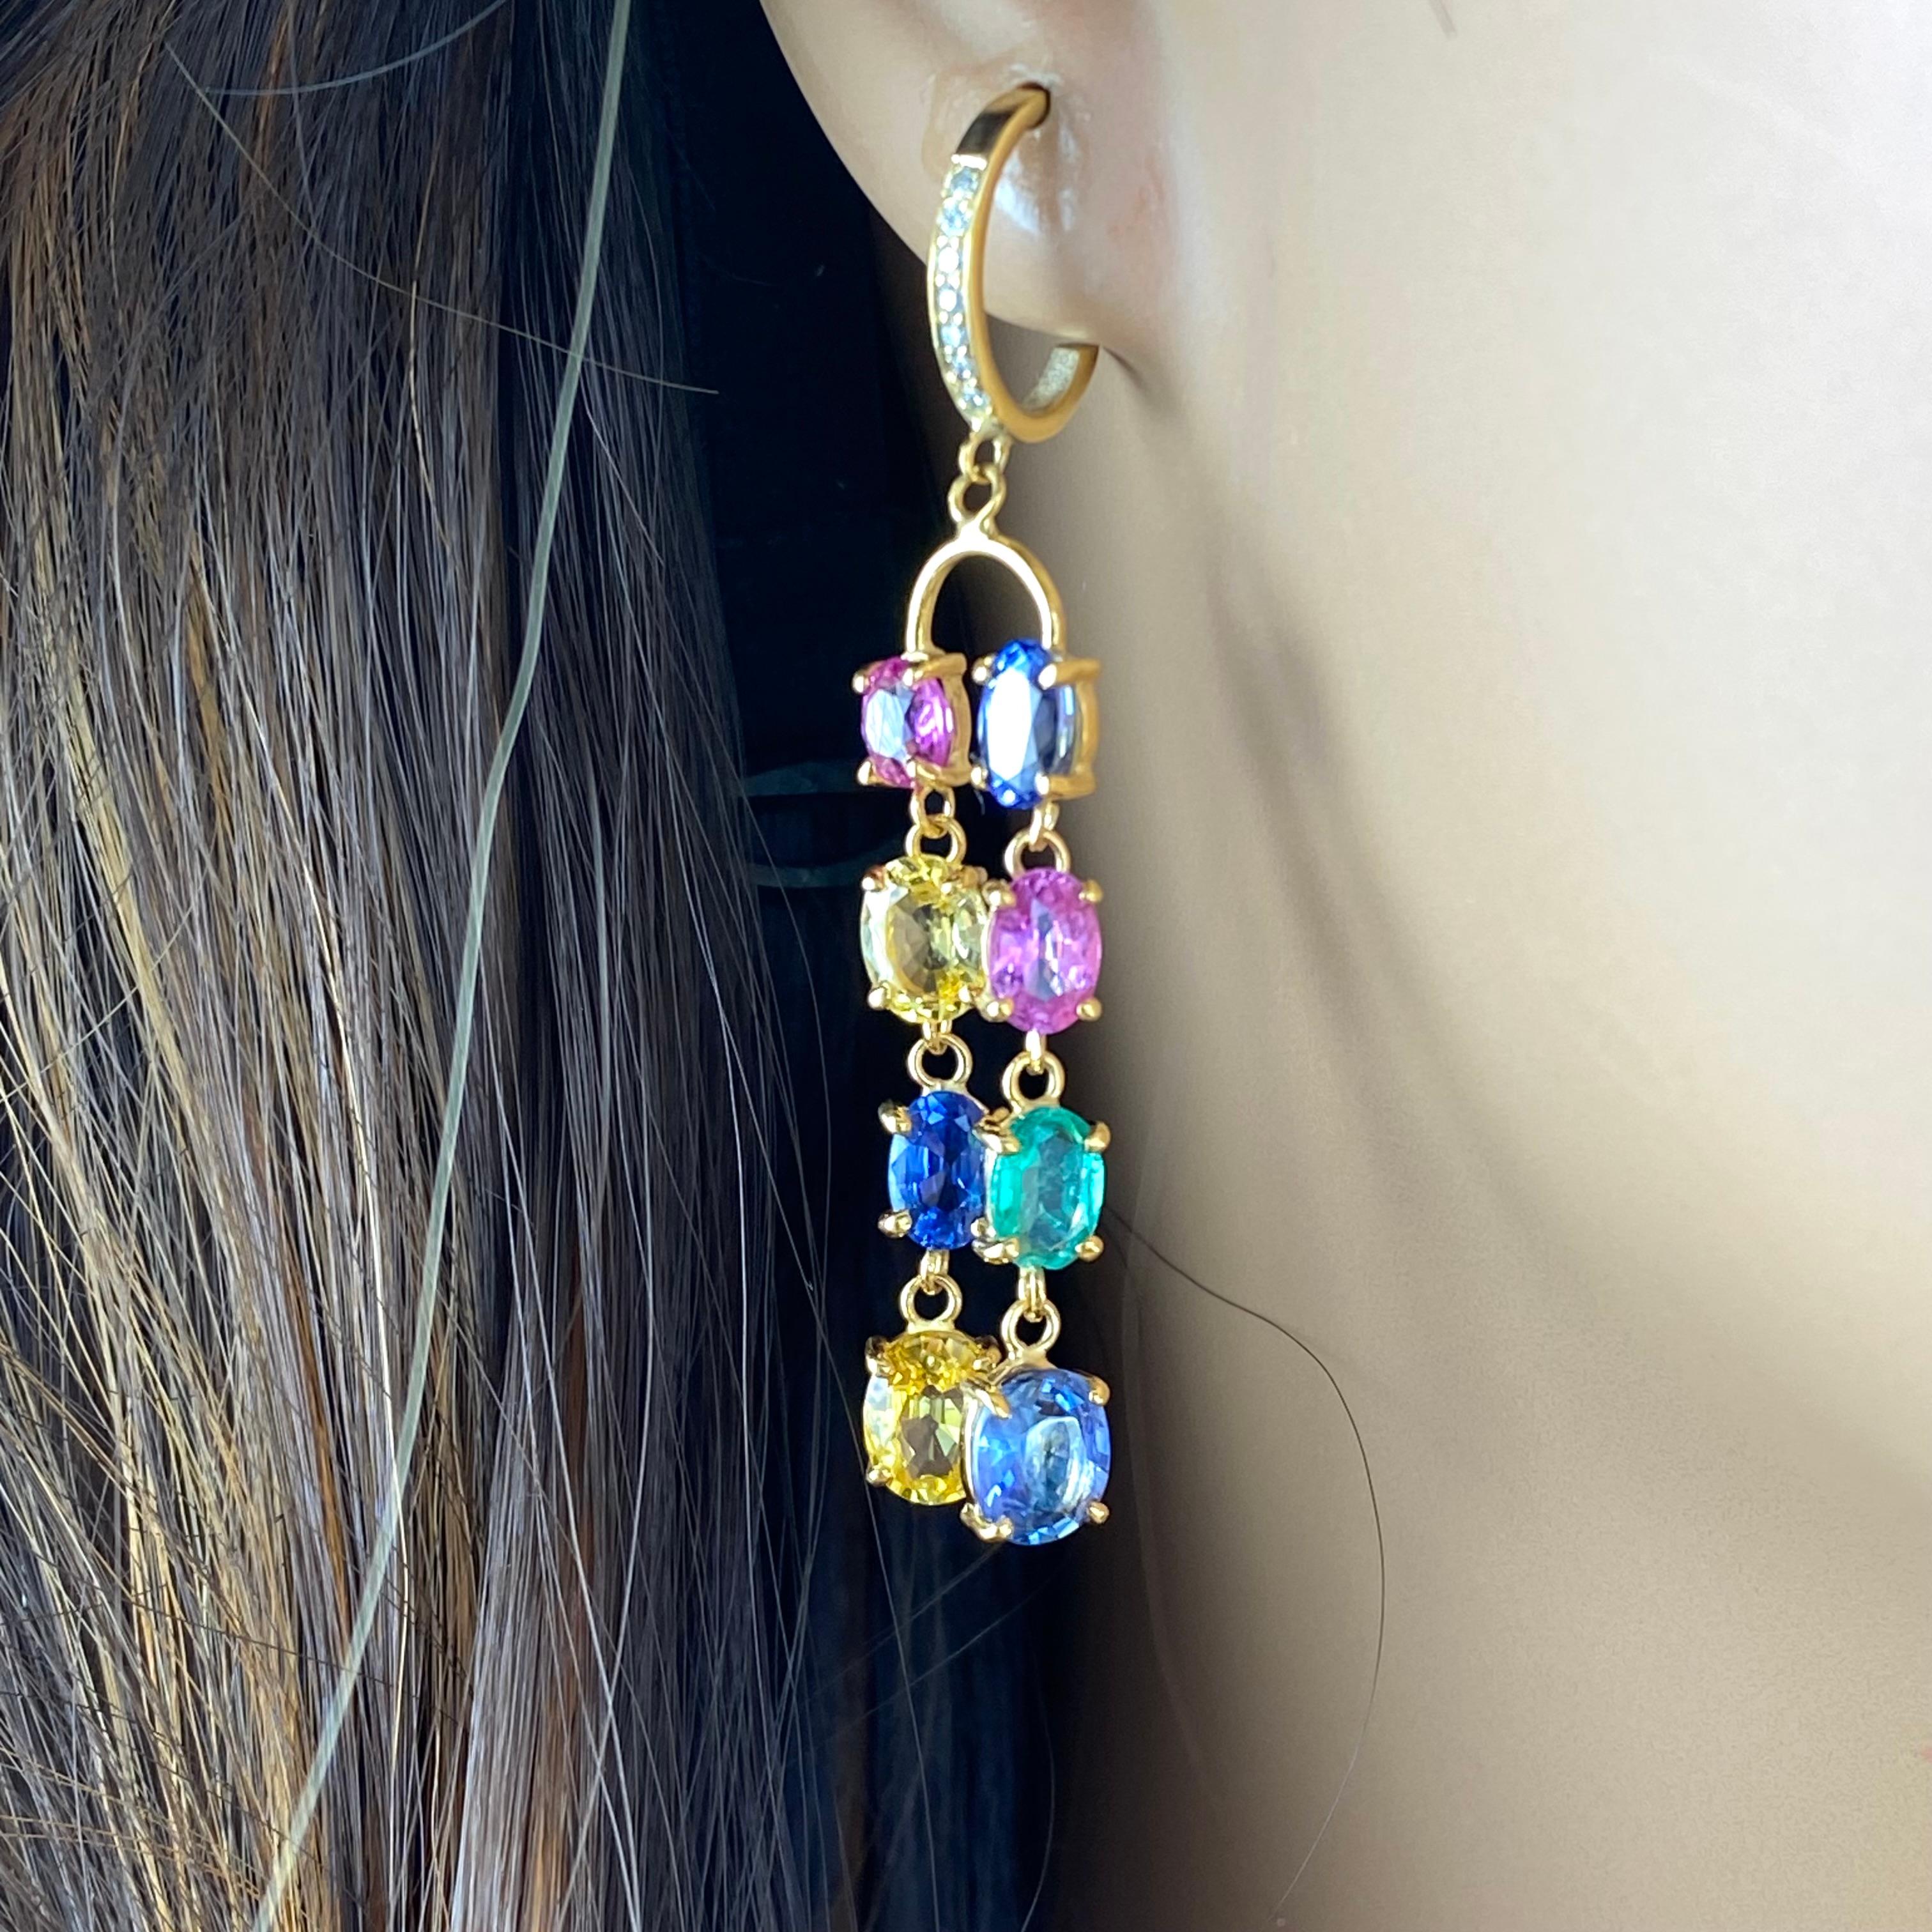 Introducing our exquisite 14 Karat Yellow Gold Double Lined Multi-Colorful Precious Stones Dangling Drop Hoop Earrings, a true testament to elegance and style. Crafted with meticulous attention to detail, these earrings are designed to captivate and